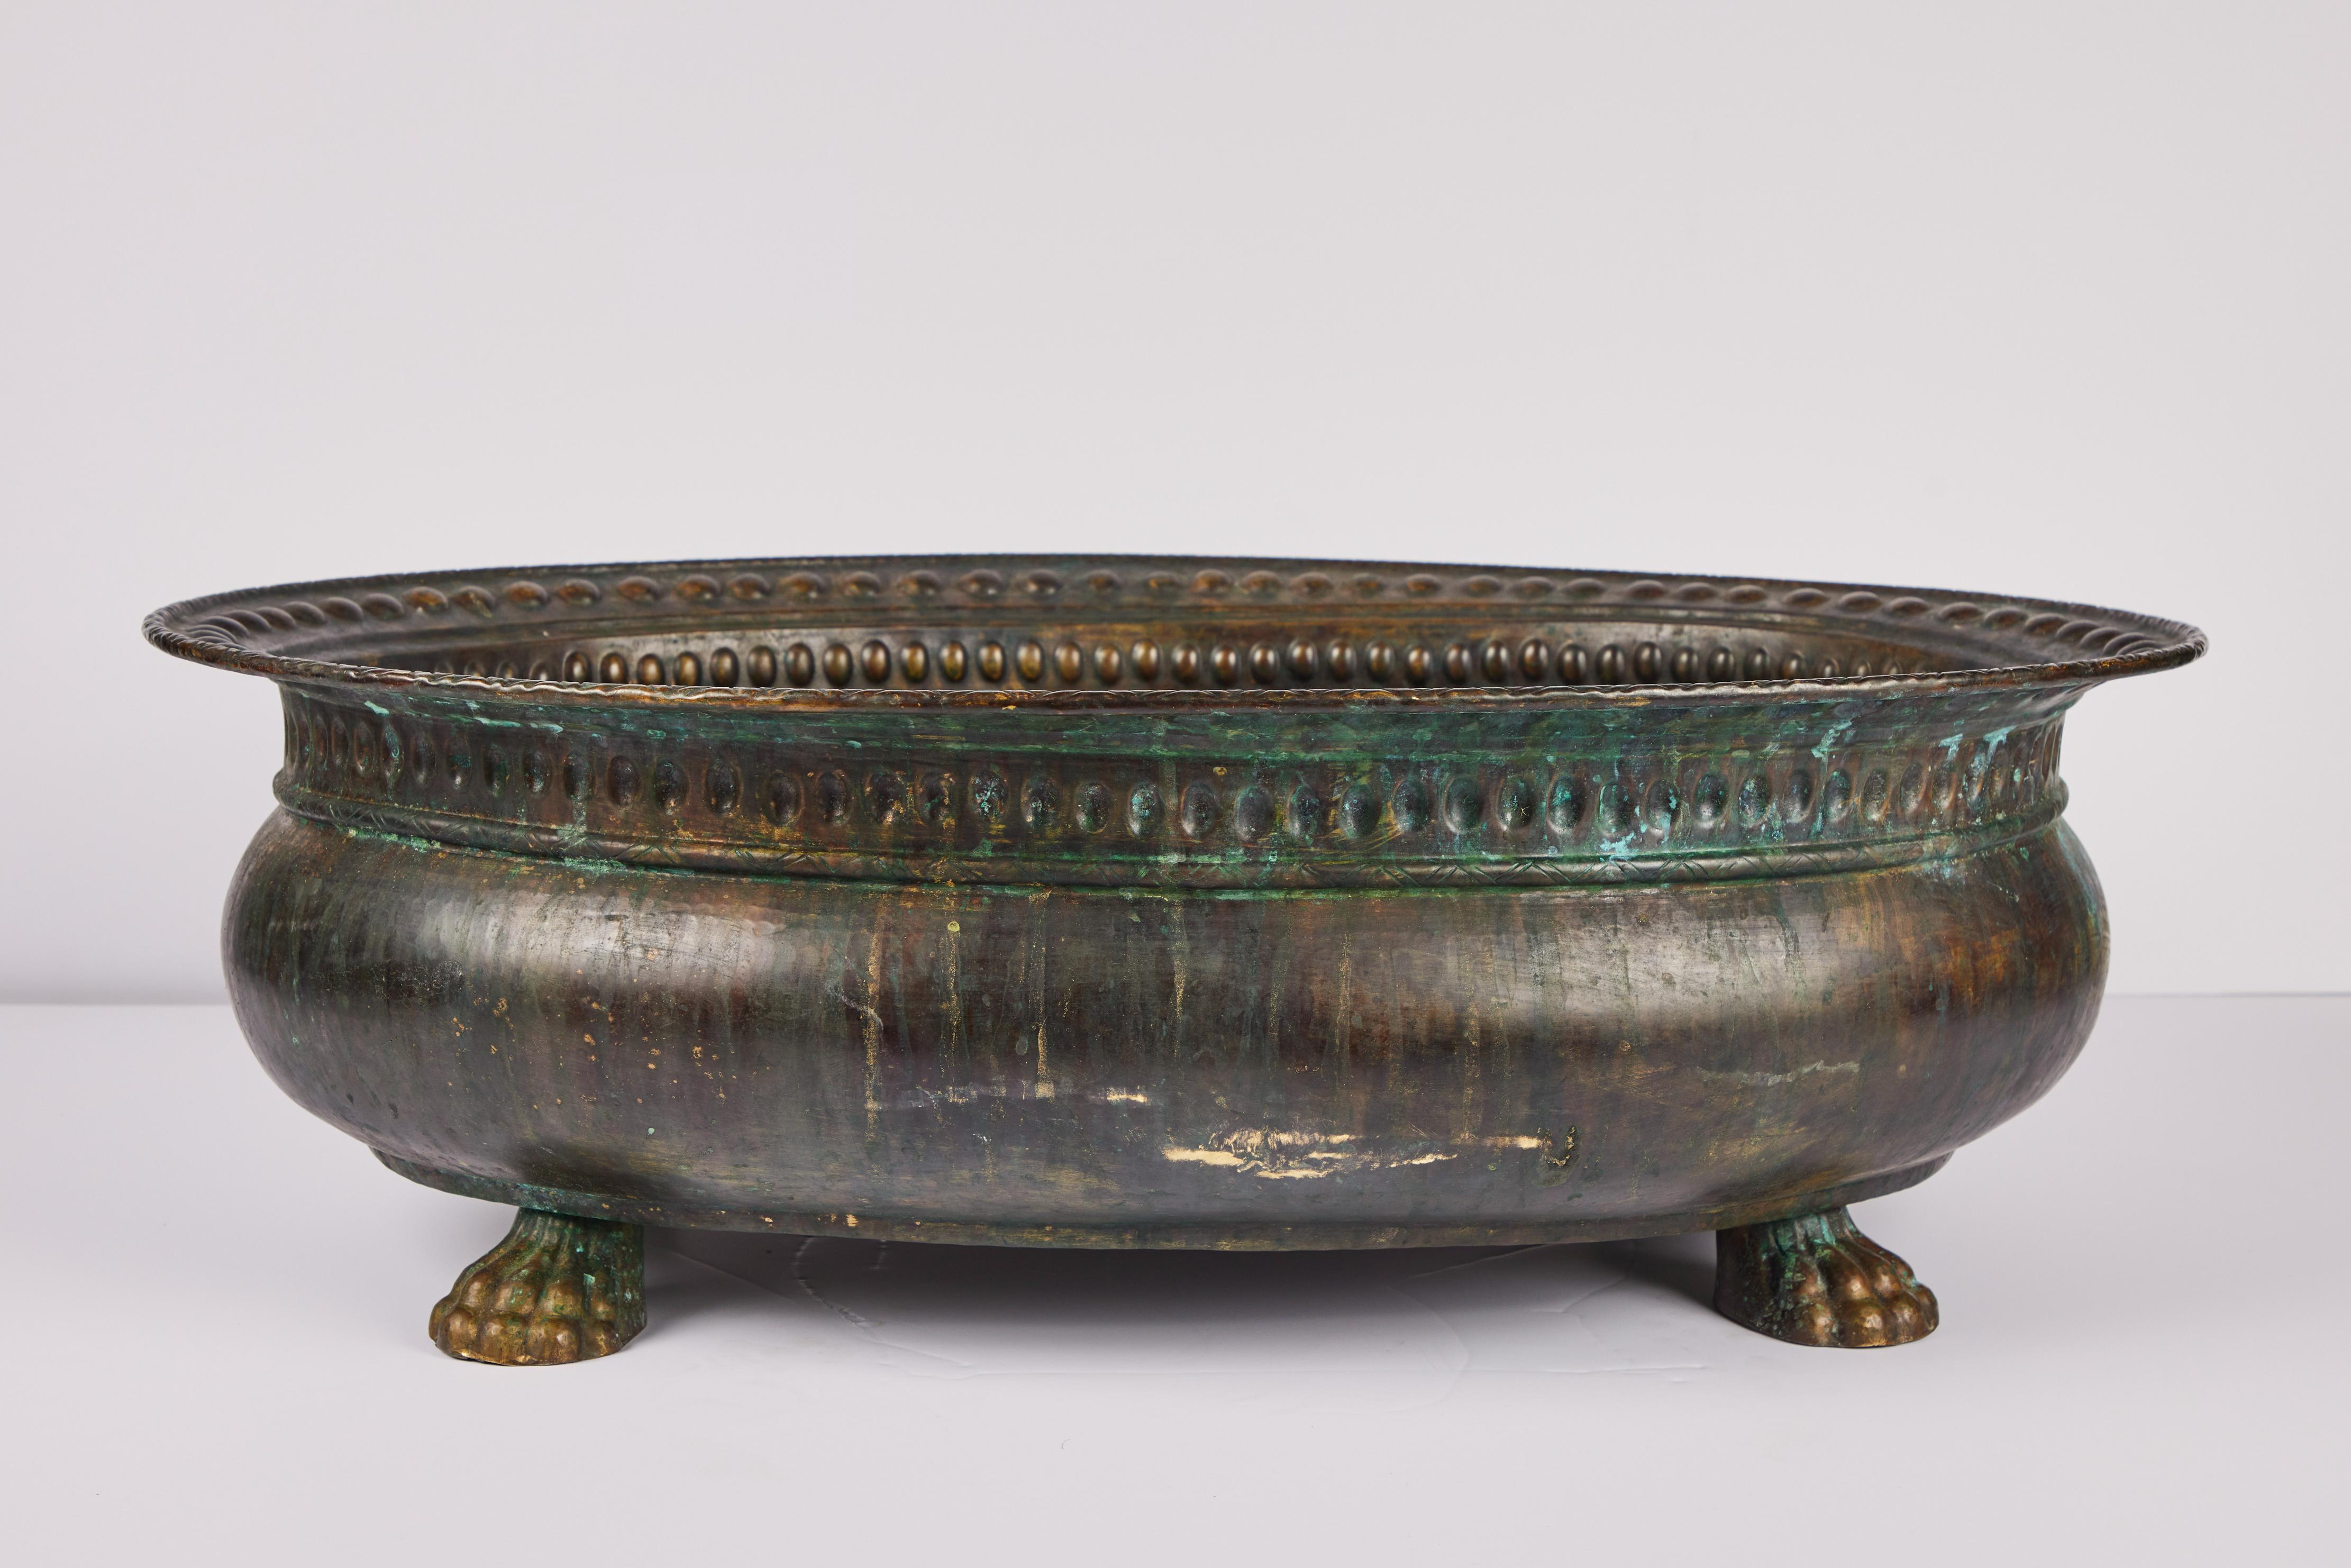 A sizable, turn-of-the-century, Italian, oval copper cachepot on a paw feet. The body surmounted by a studded lip and rim. Excellent patina.